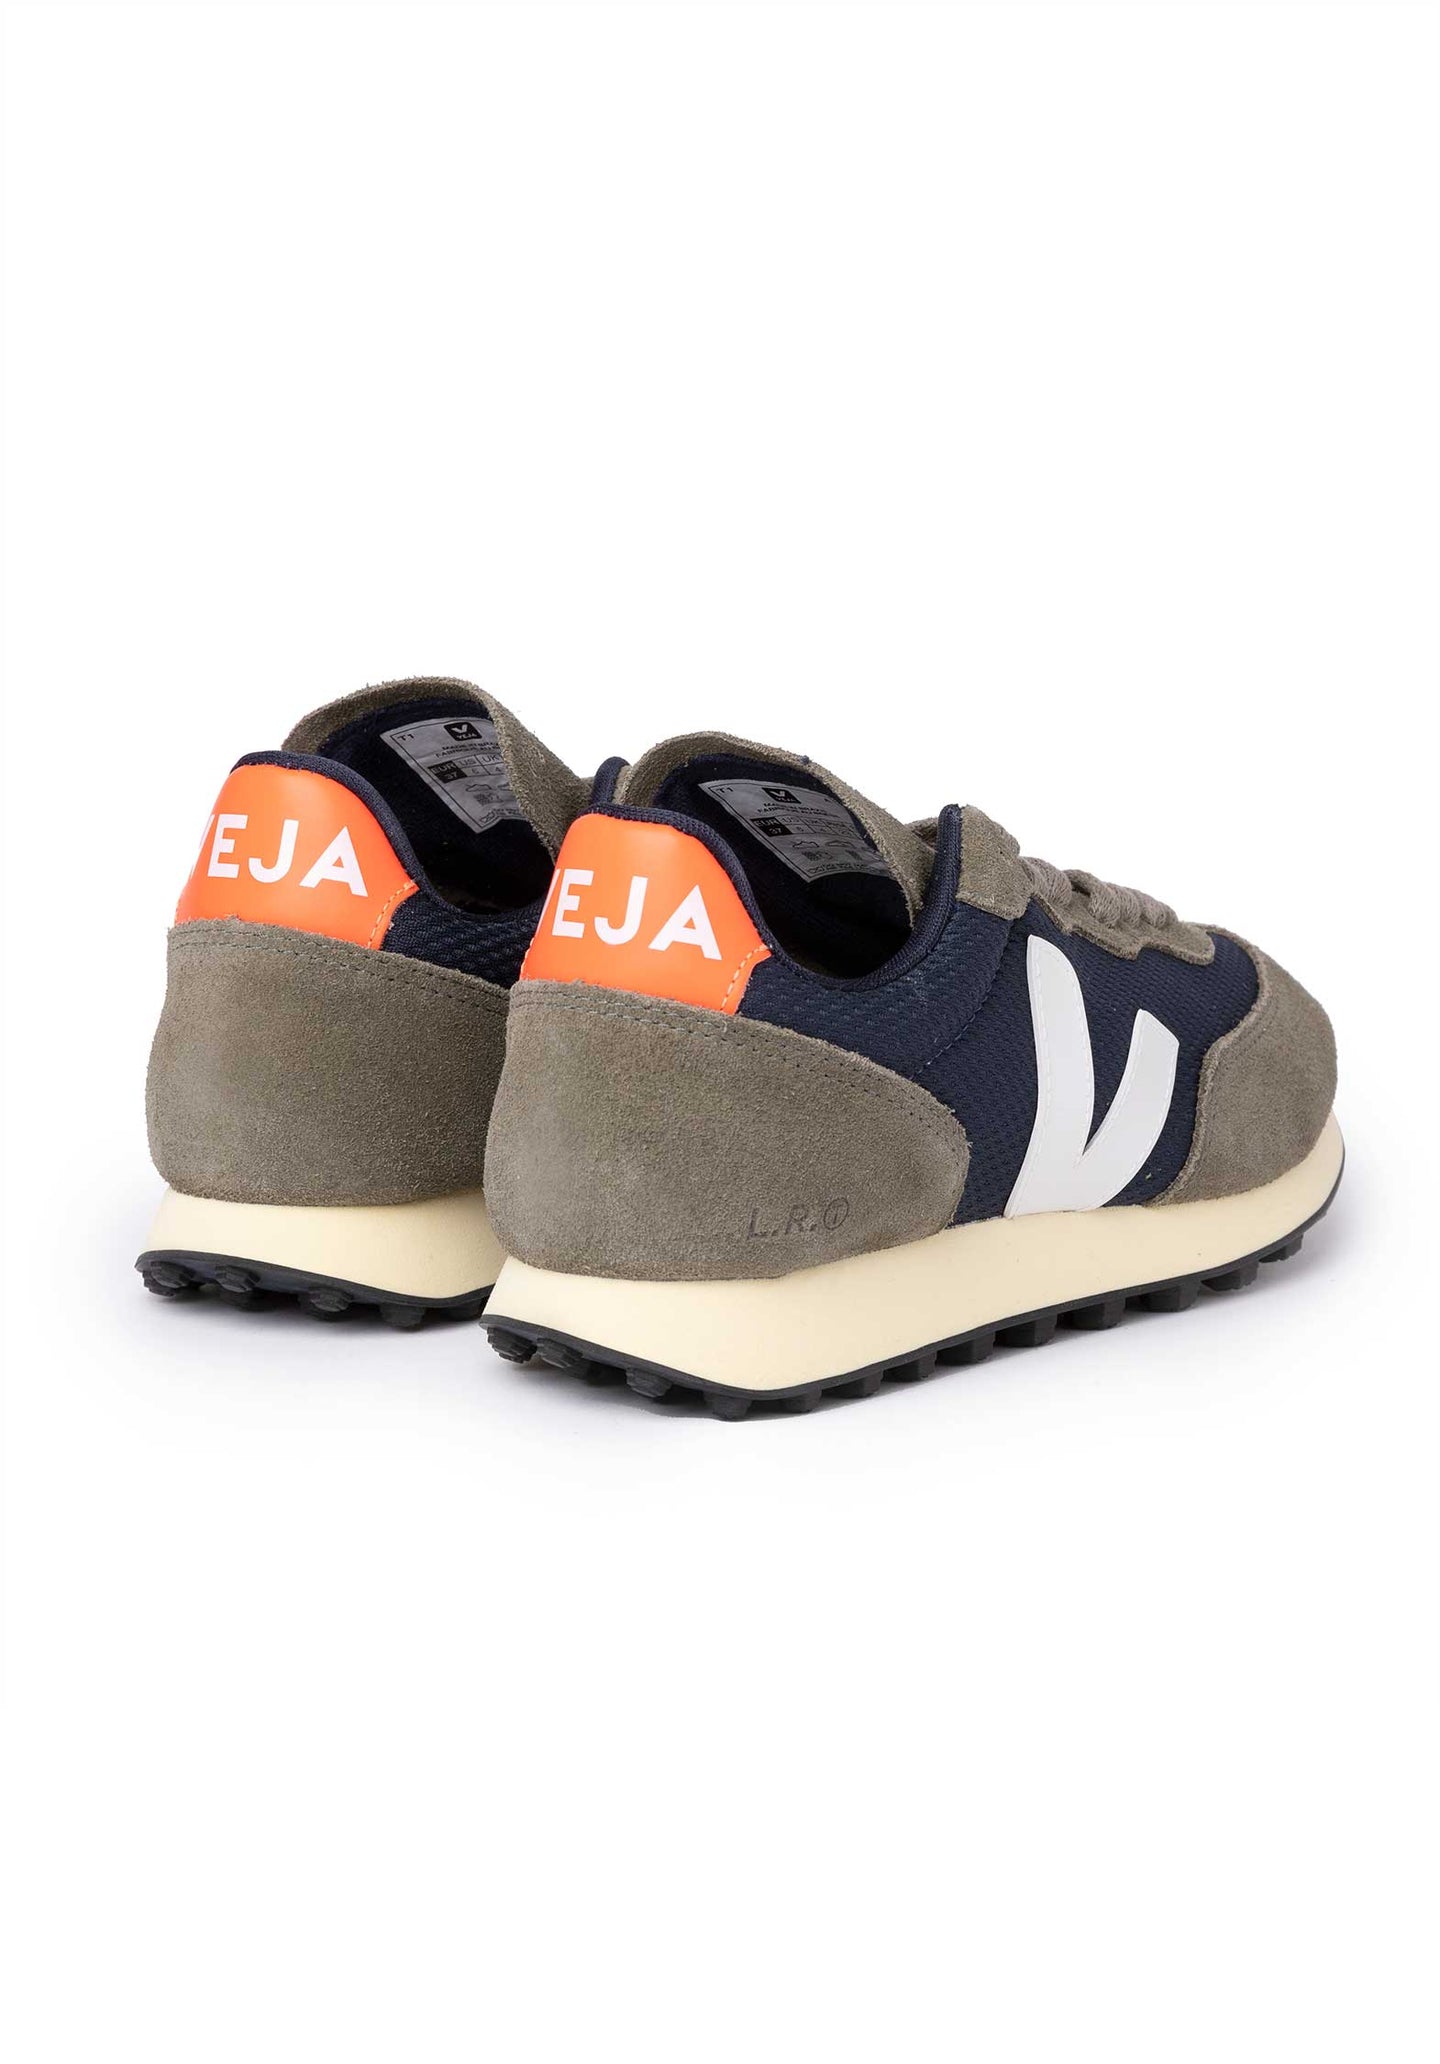 Veja sneakers and Veja eco-friendly shoes for women